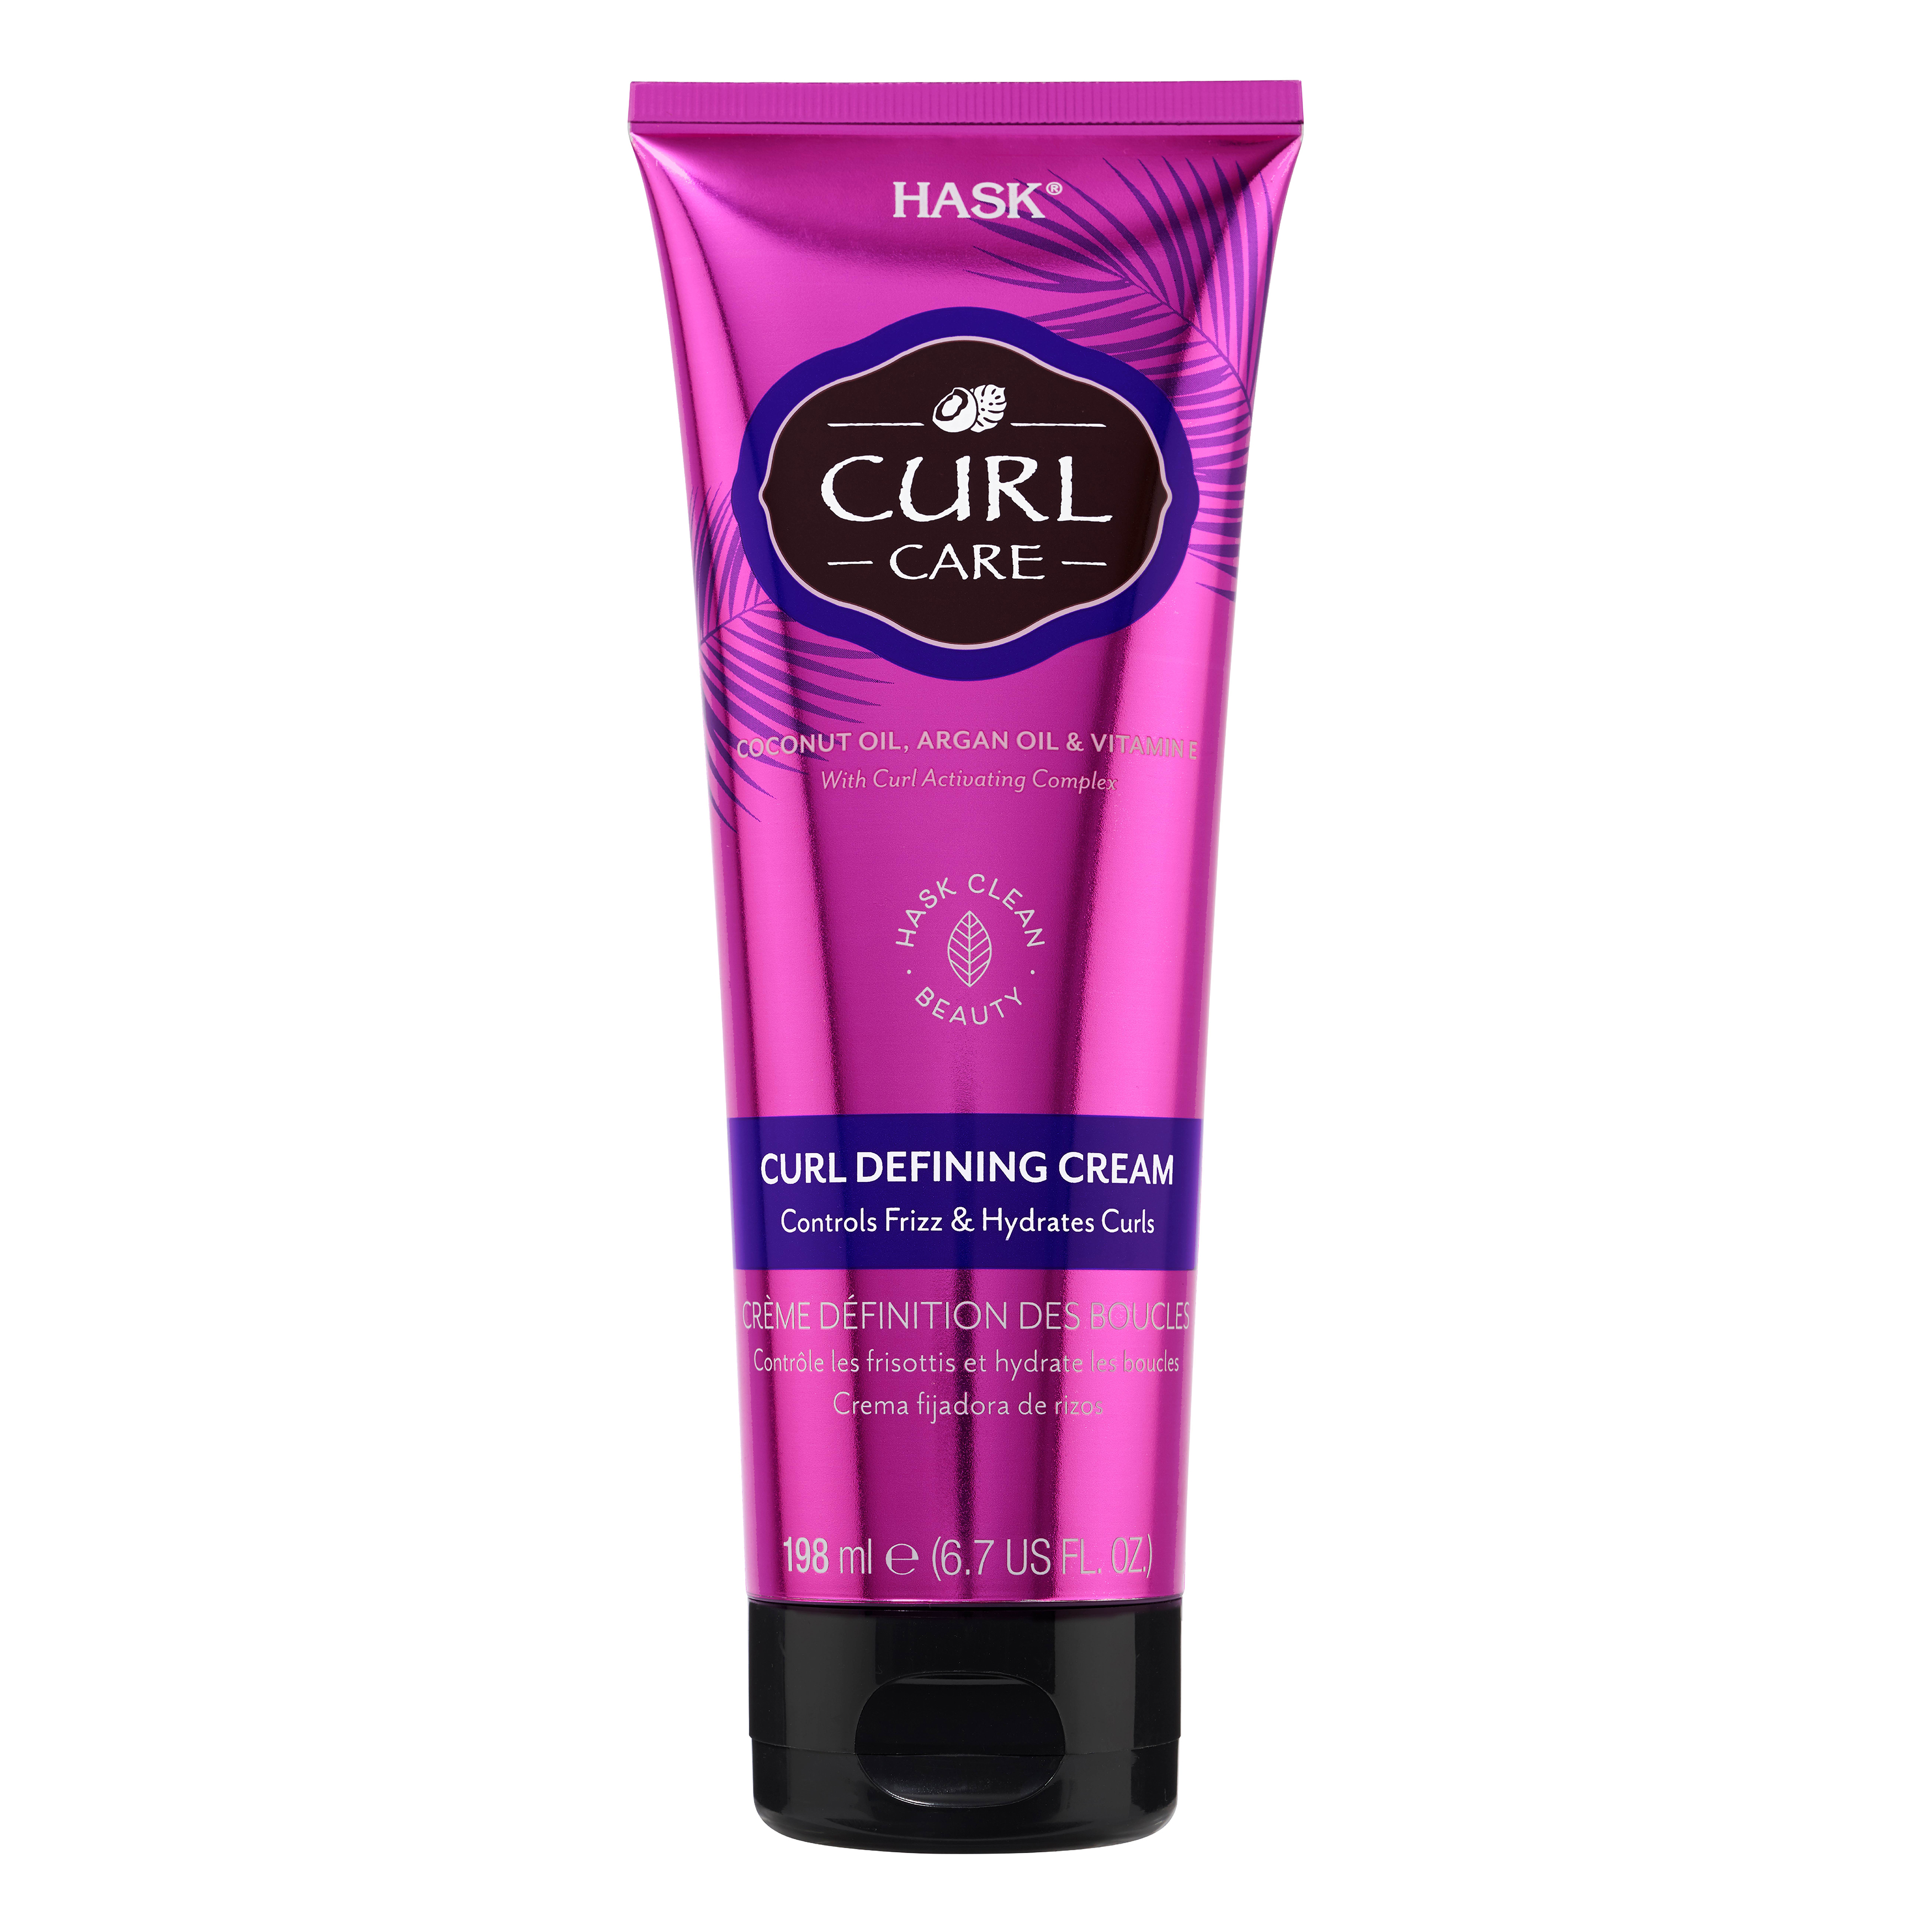 Hask Curl Care Moisturizing Shine Enhancing Hair Styling & Defining Cream with Coconut oil, Argan Oil & Vitamin E, 6.7 fl oz - image 1 of 15